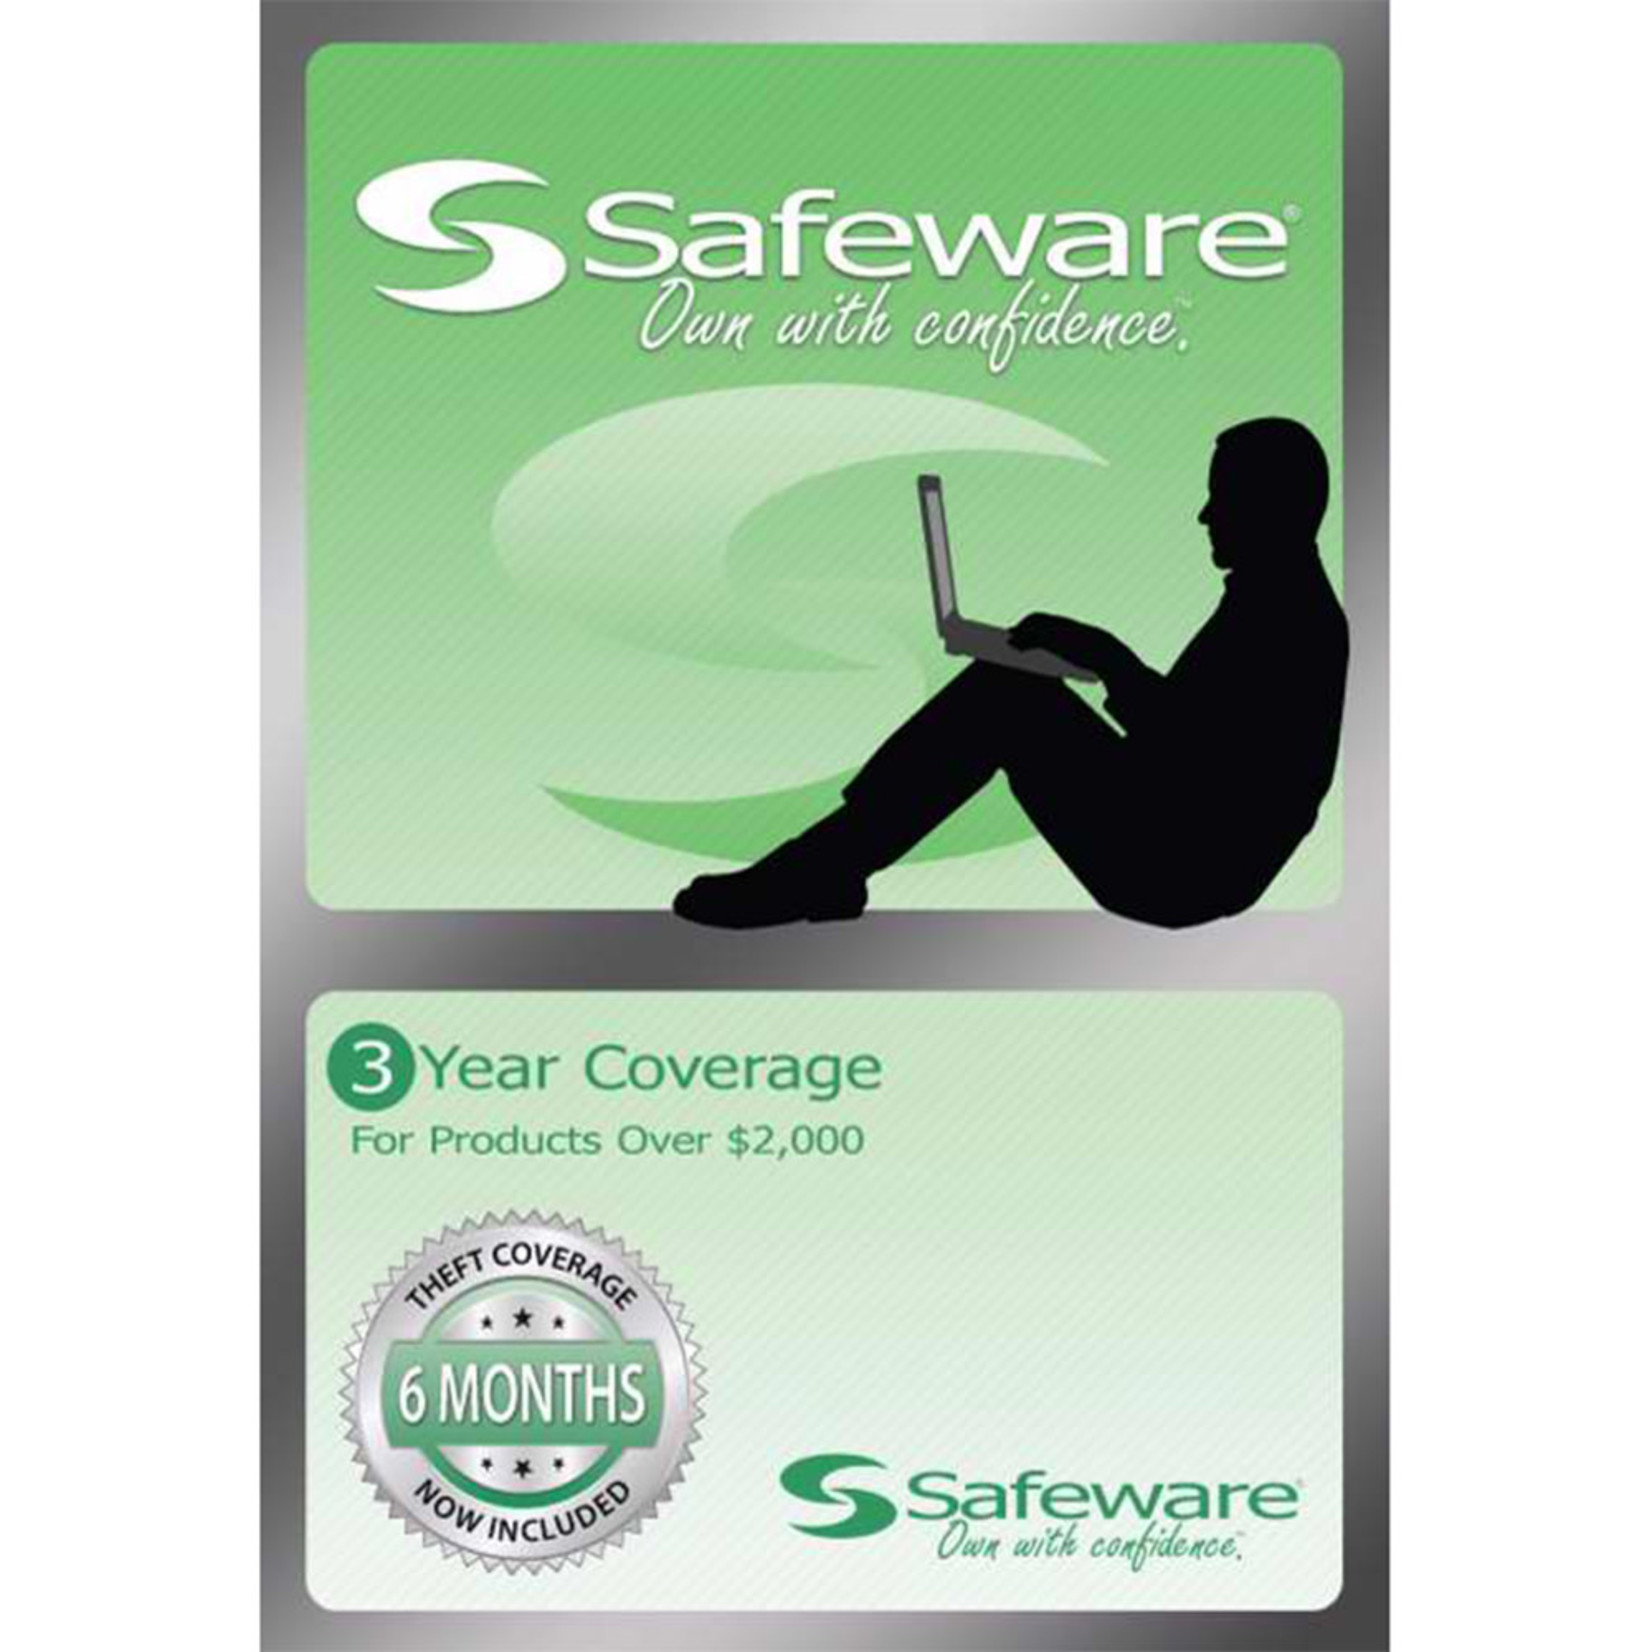 Safeware Safeware 3 Year Coverage for Products Over $2,000 Light Green Card Accidental damage and theft coverage